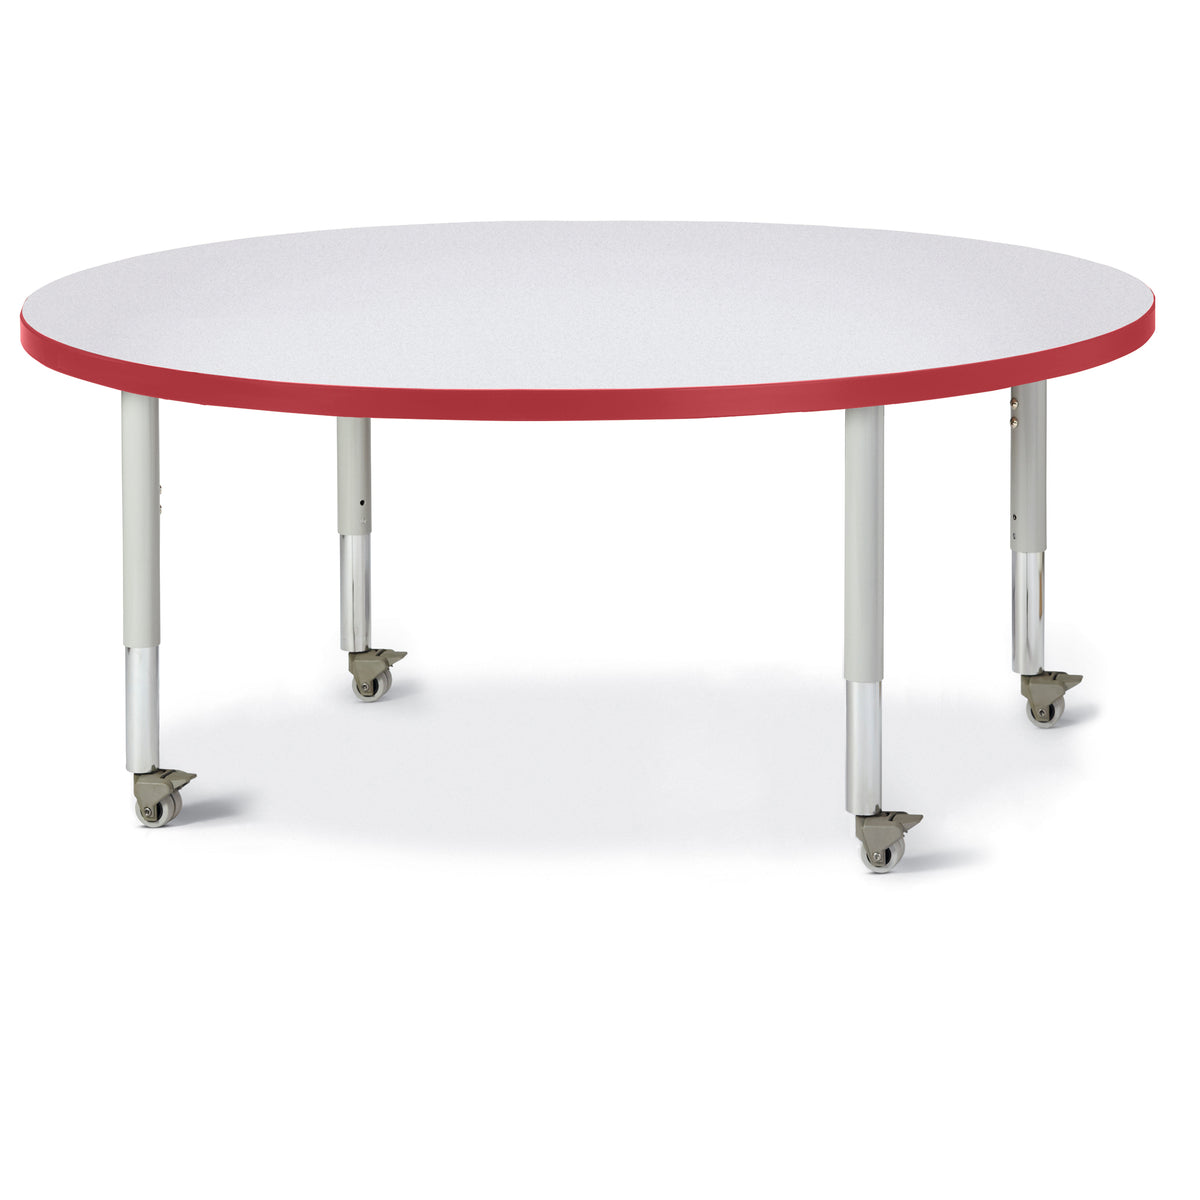 6433JCM008, Berries Round Activity Table - 48" Diameter, Mobile - Freckled Gray/Red/Gray